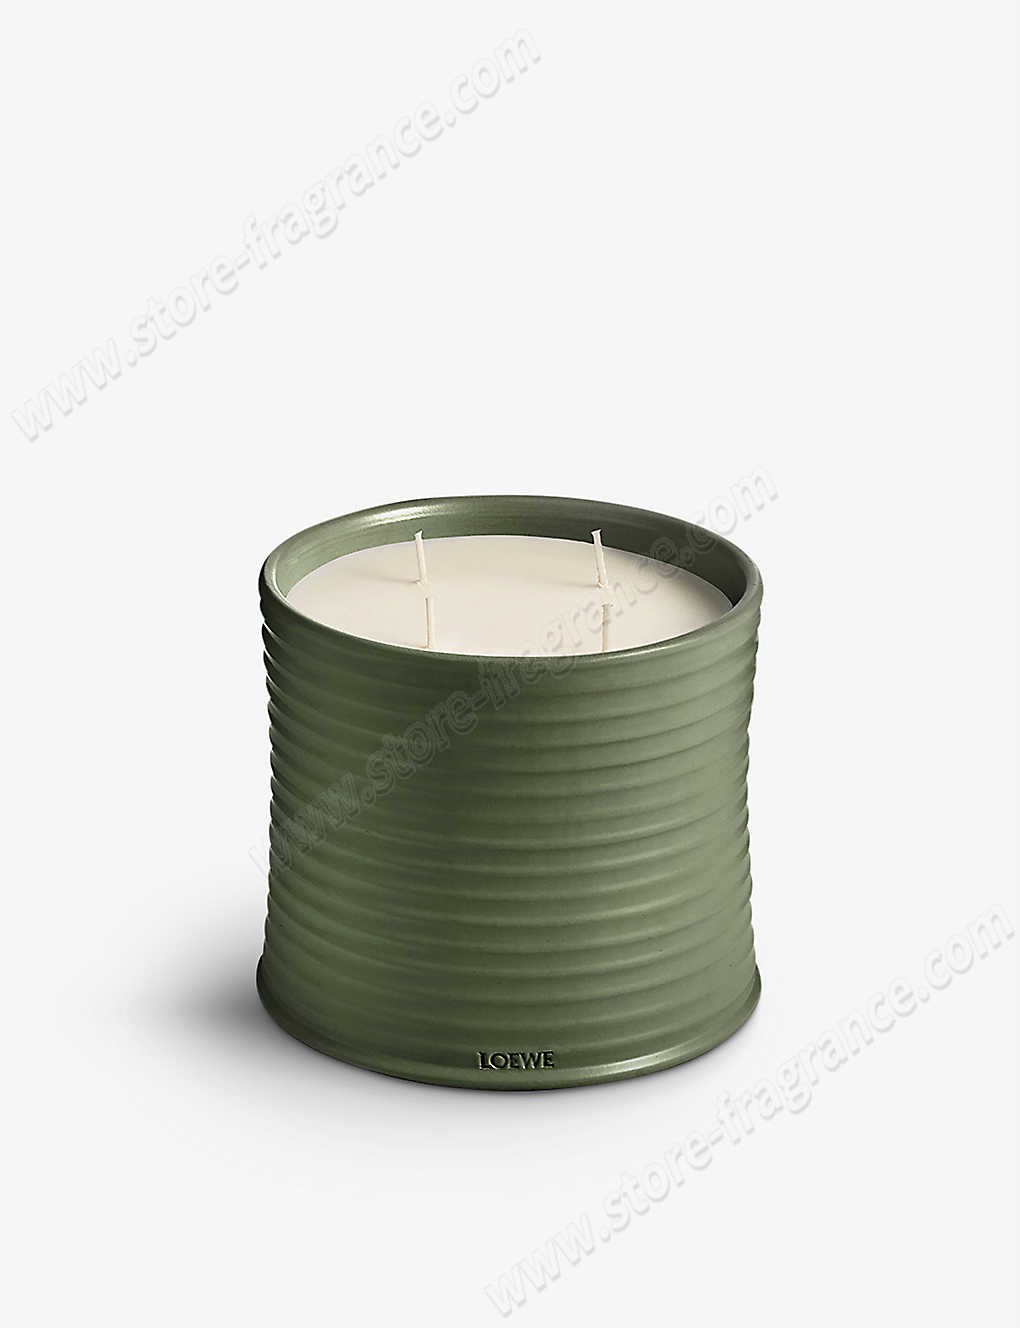 LOEWE/Scent of Marihuana large scented candle 2.12kg ✿ Discount Store - LOEWE/Scent of Marihuana large scented candle 2.12kg ✿ Discount Store